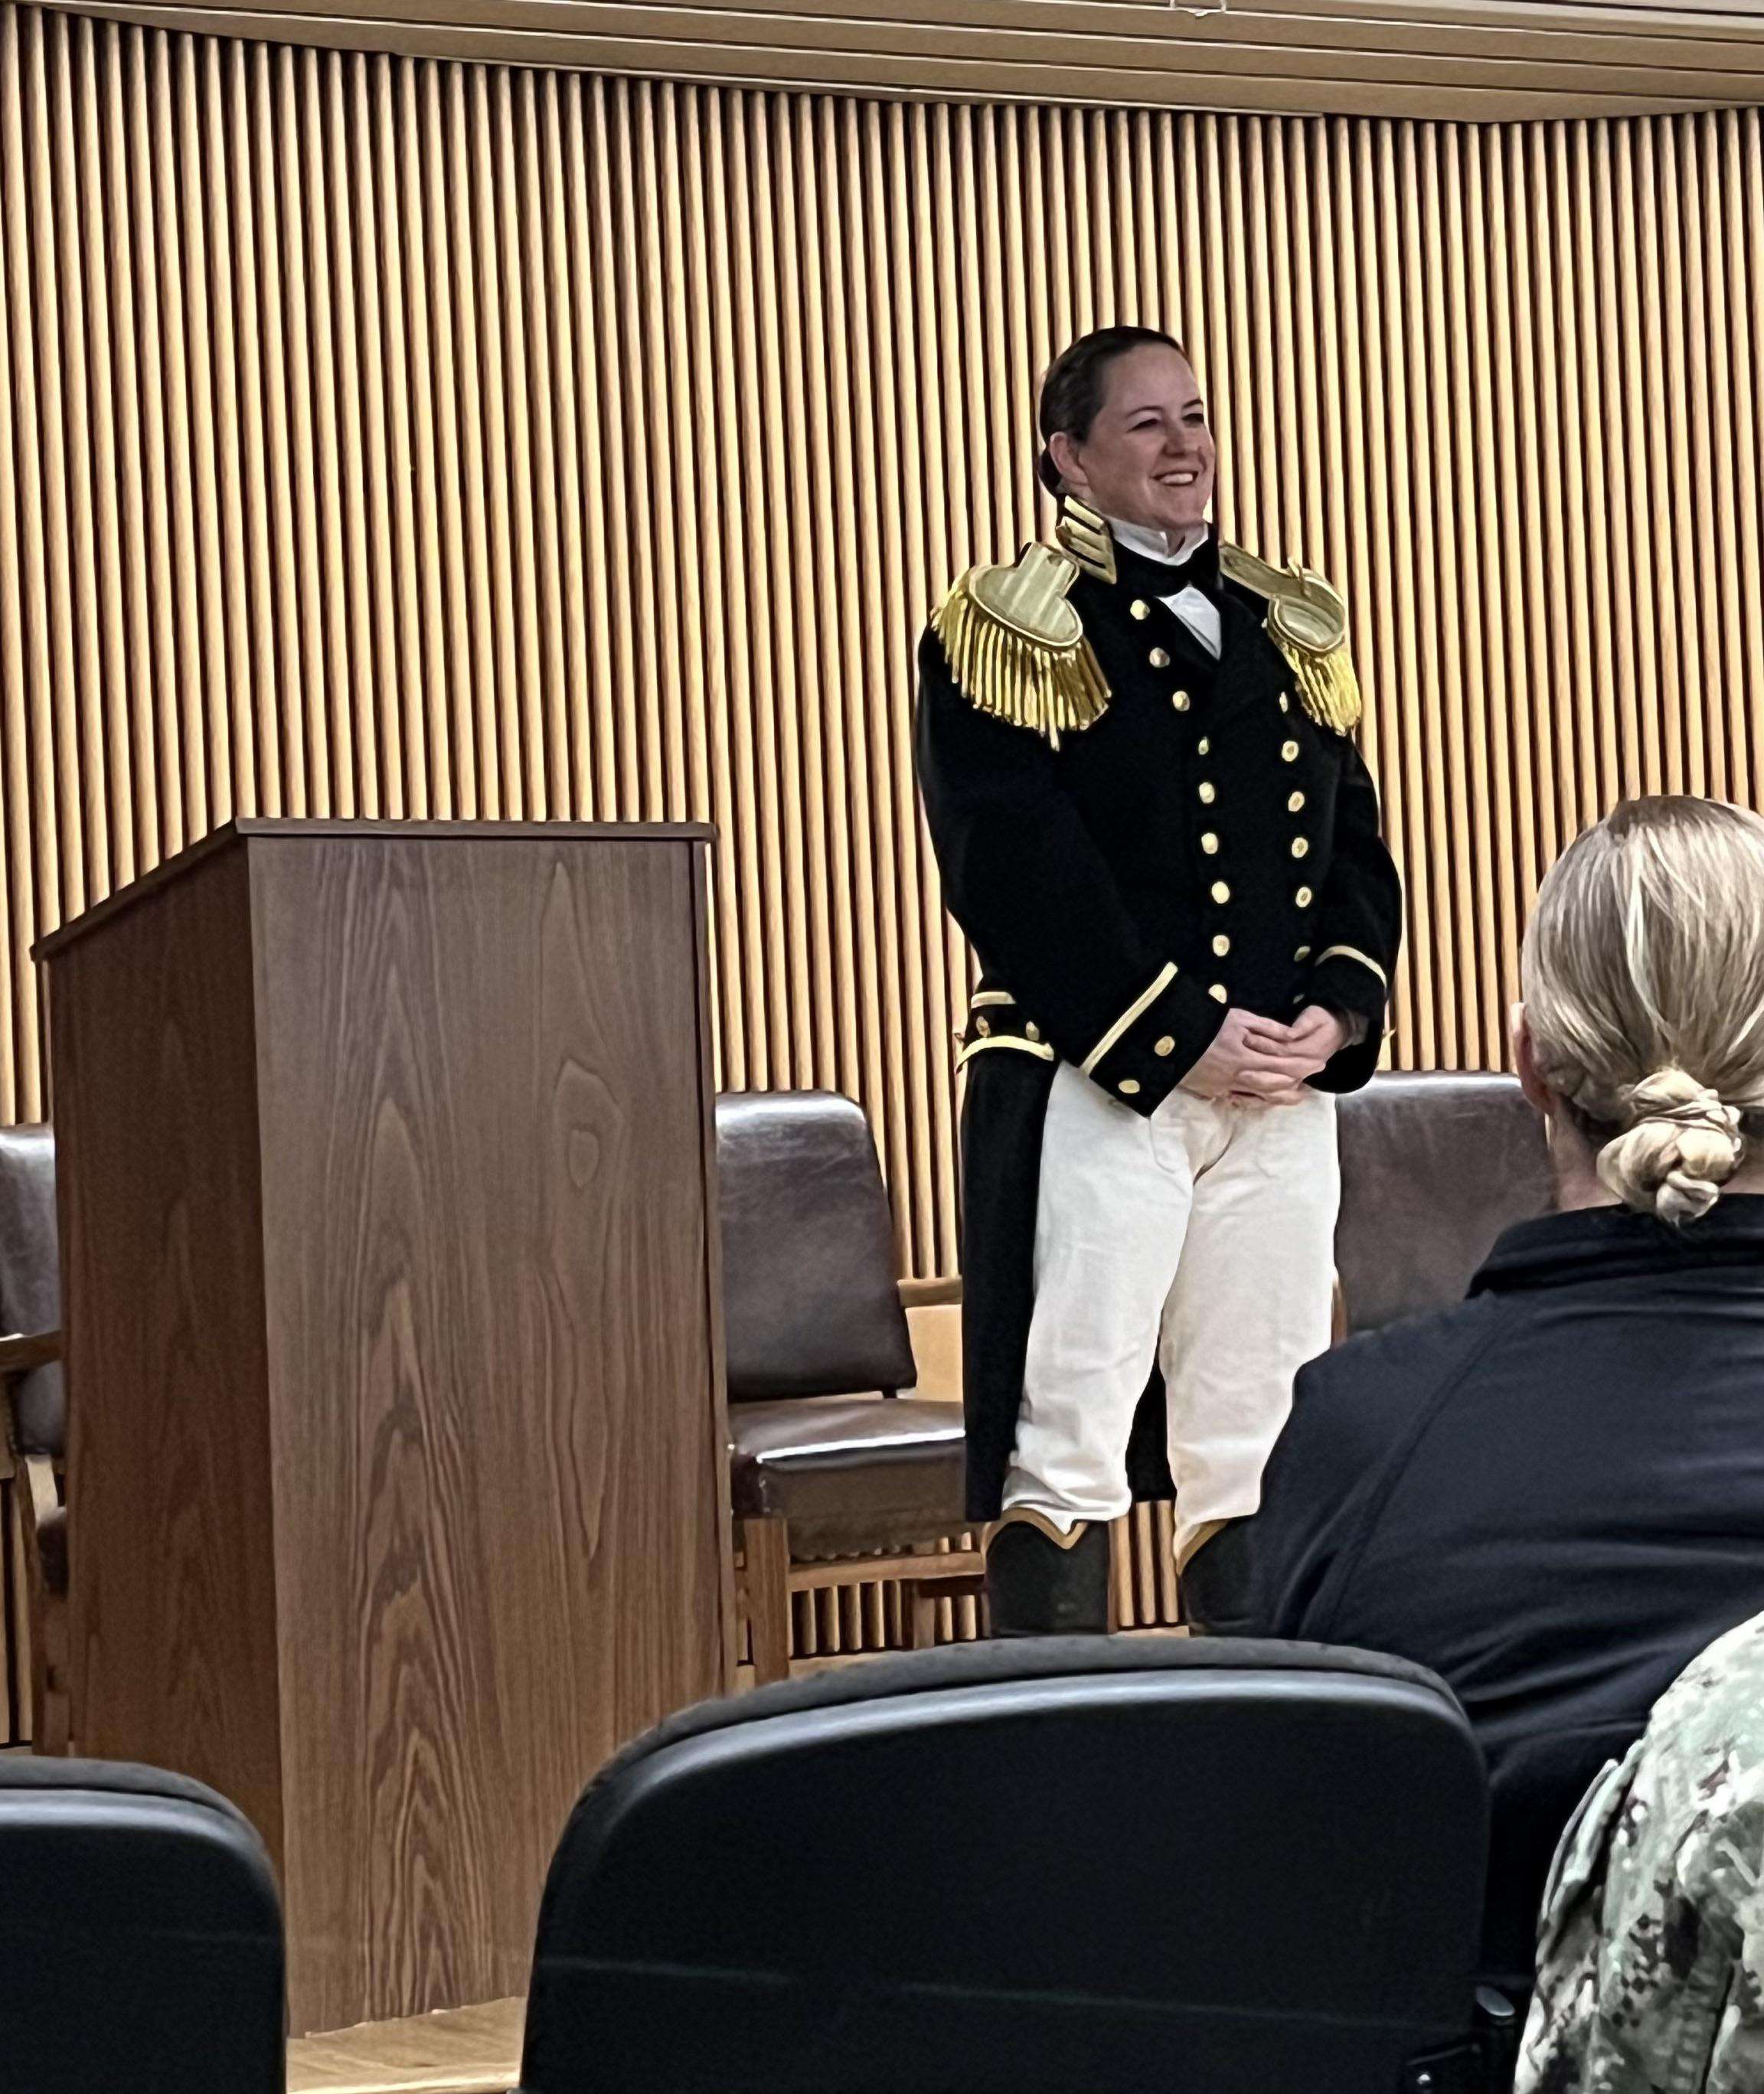 image showing [OC] Commander Farrell, the first female Commanding Officer of the USS CONSTITUTION.